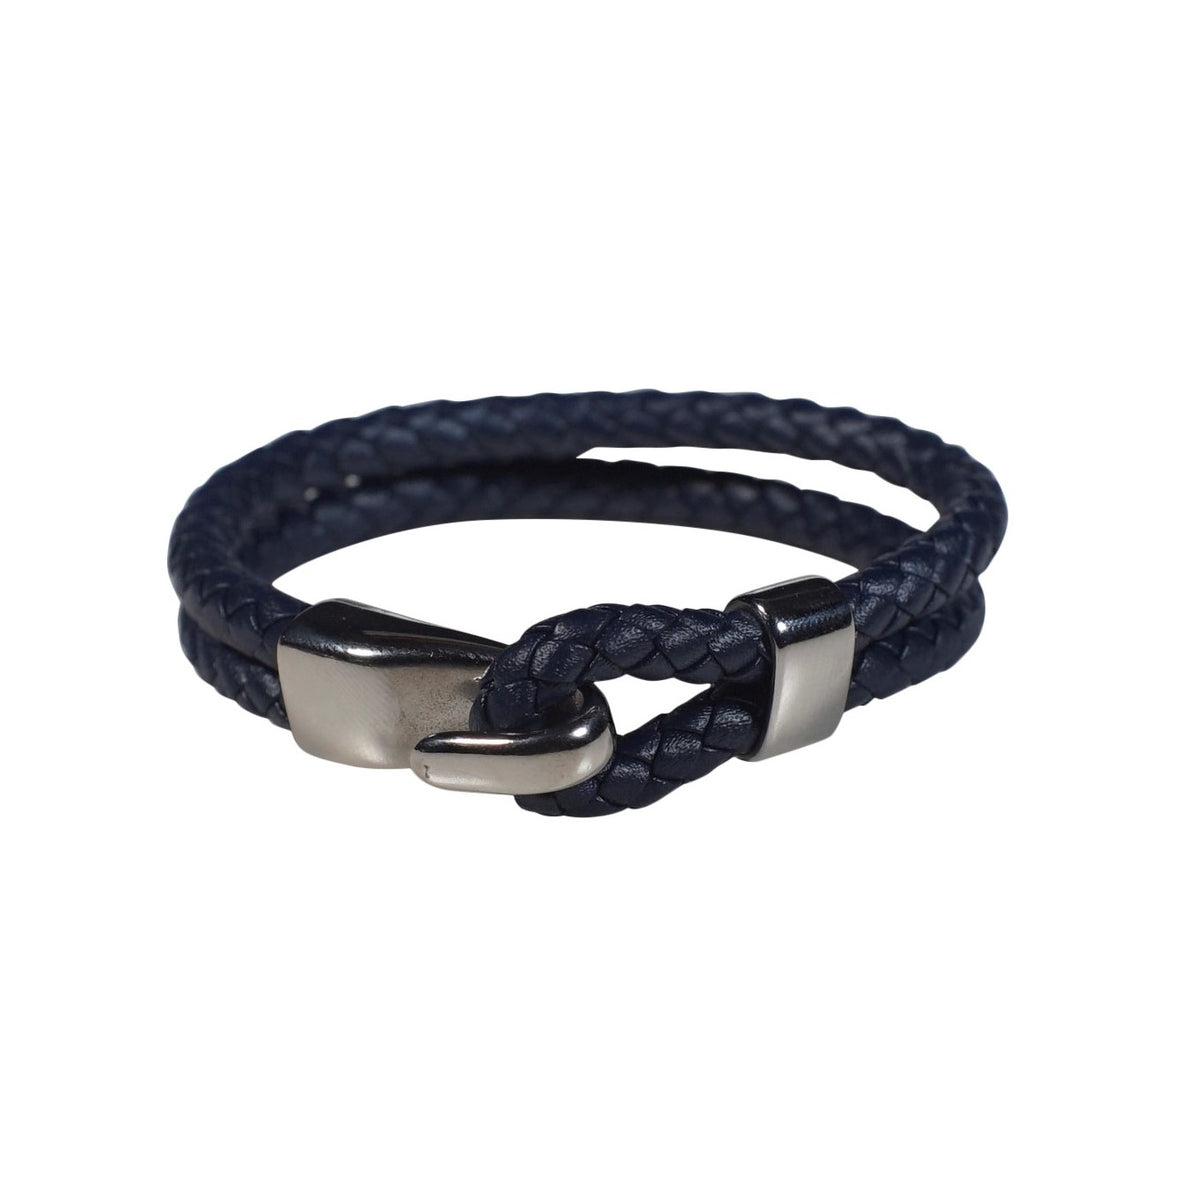 Oxford Leather Bracelet in Navy (Size M) - Nomad watch Works